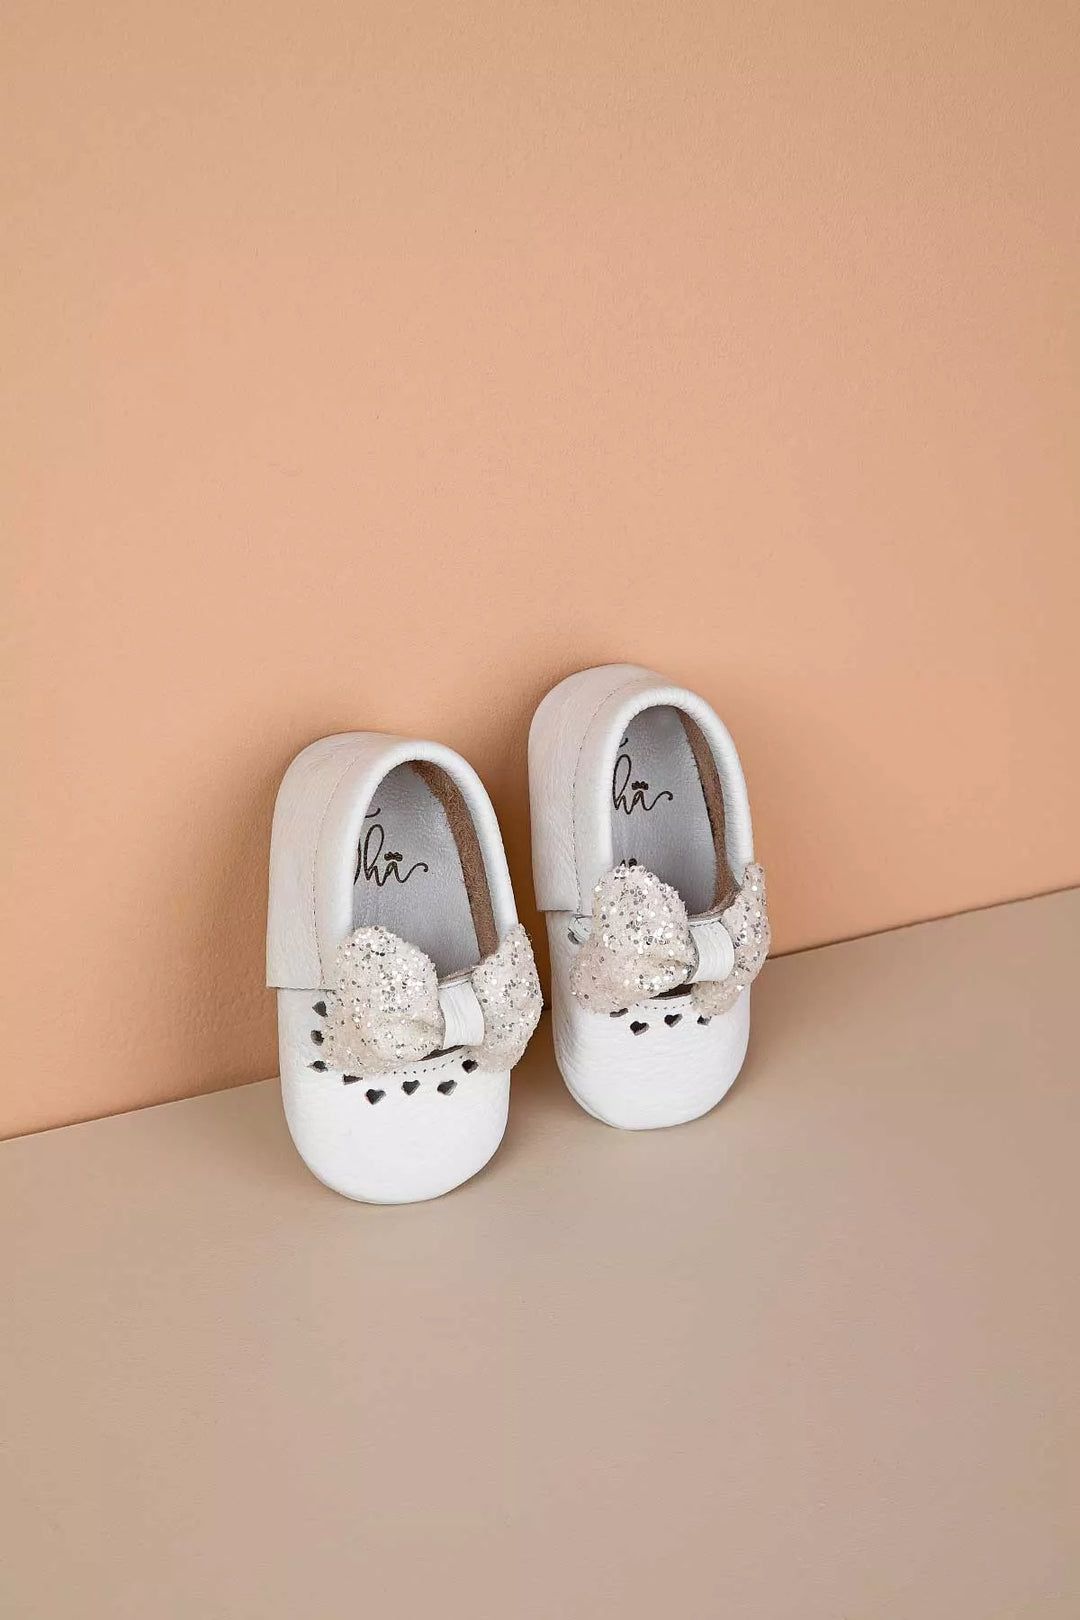 White baby shoes that have glitter bow tie and heart details